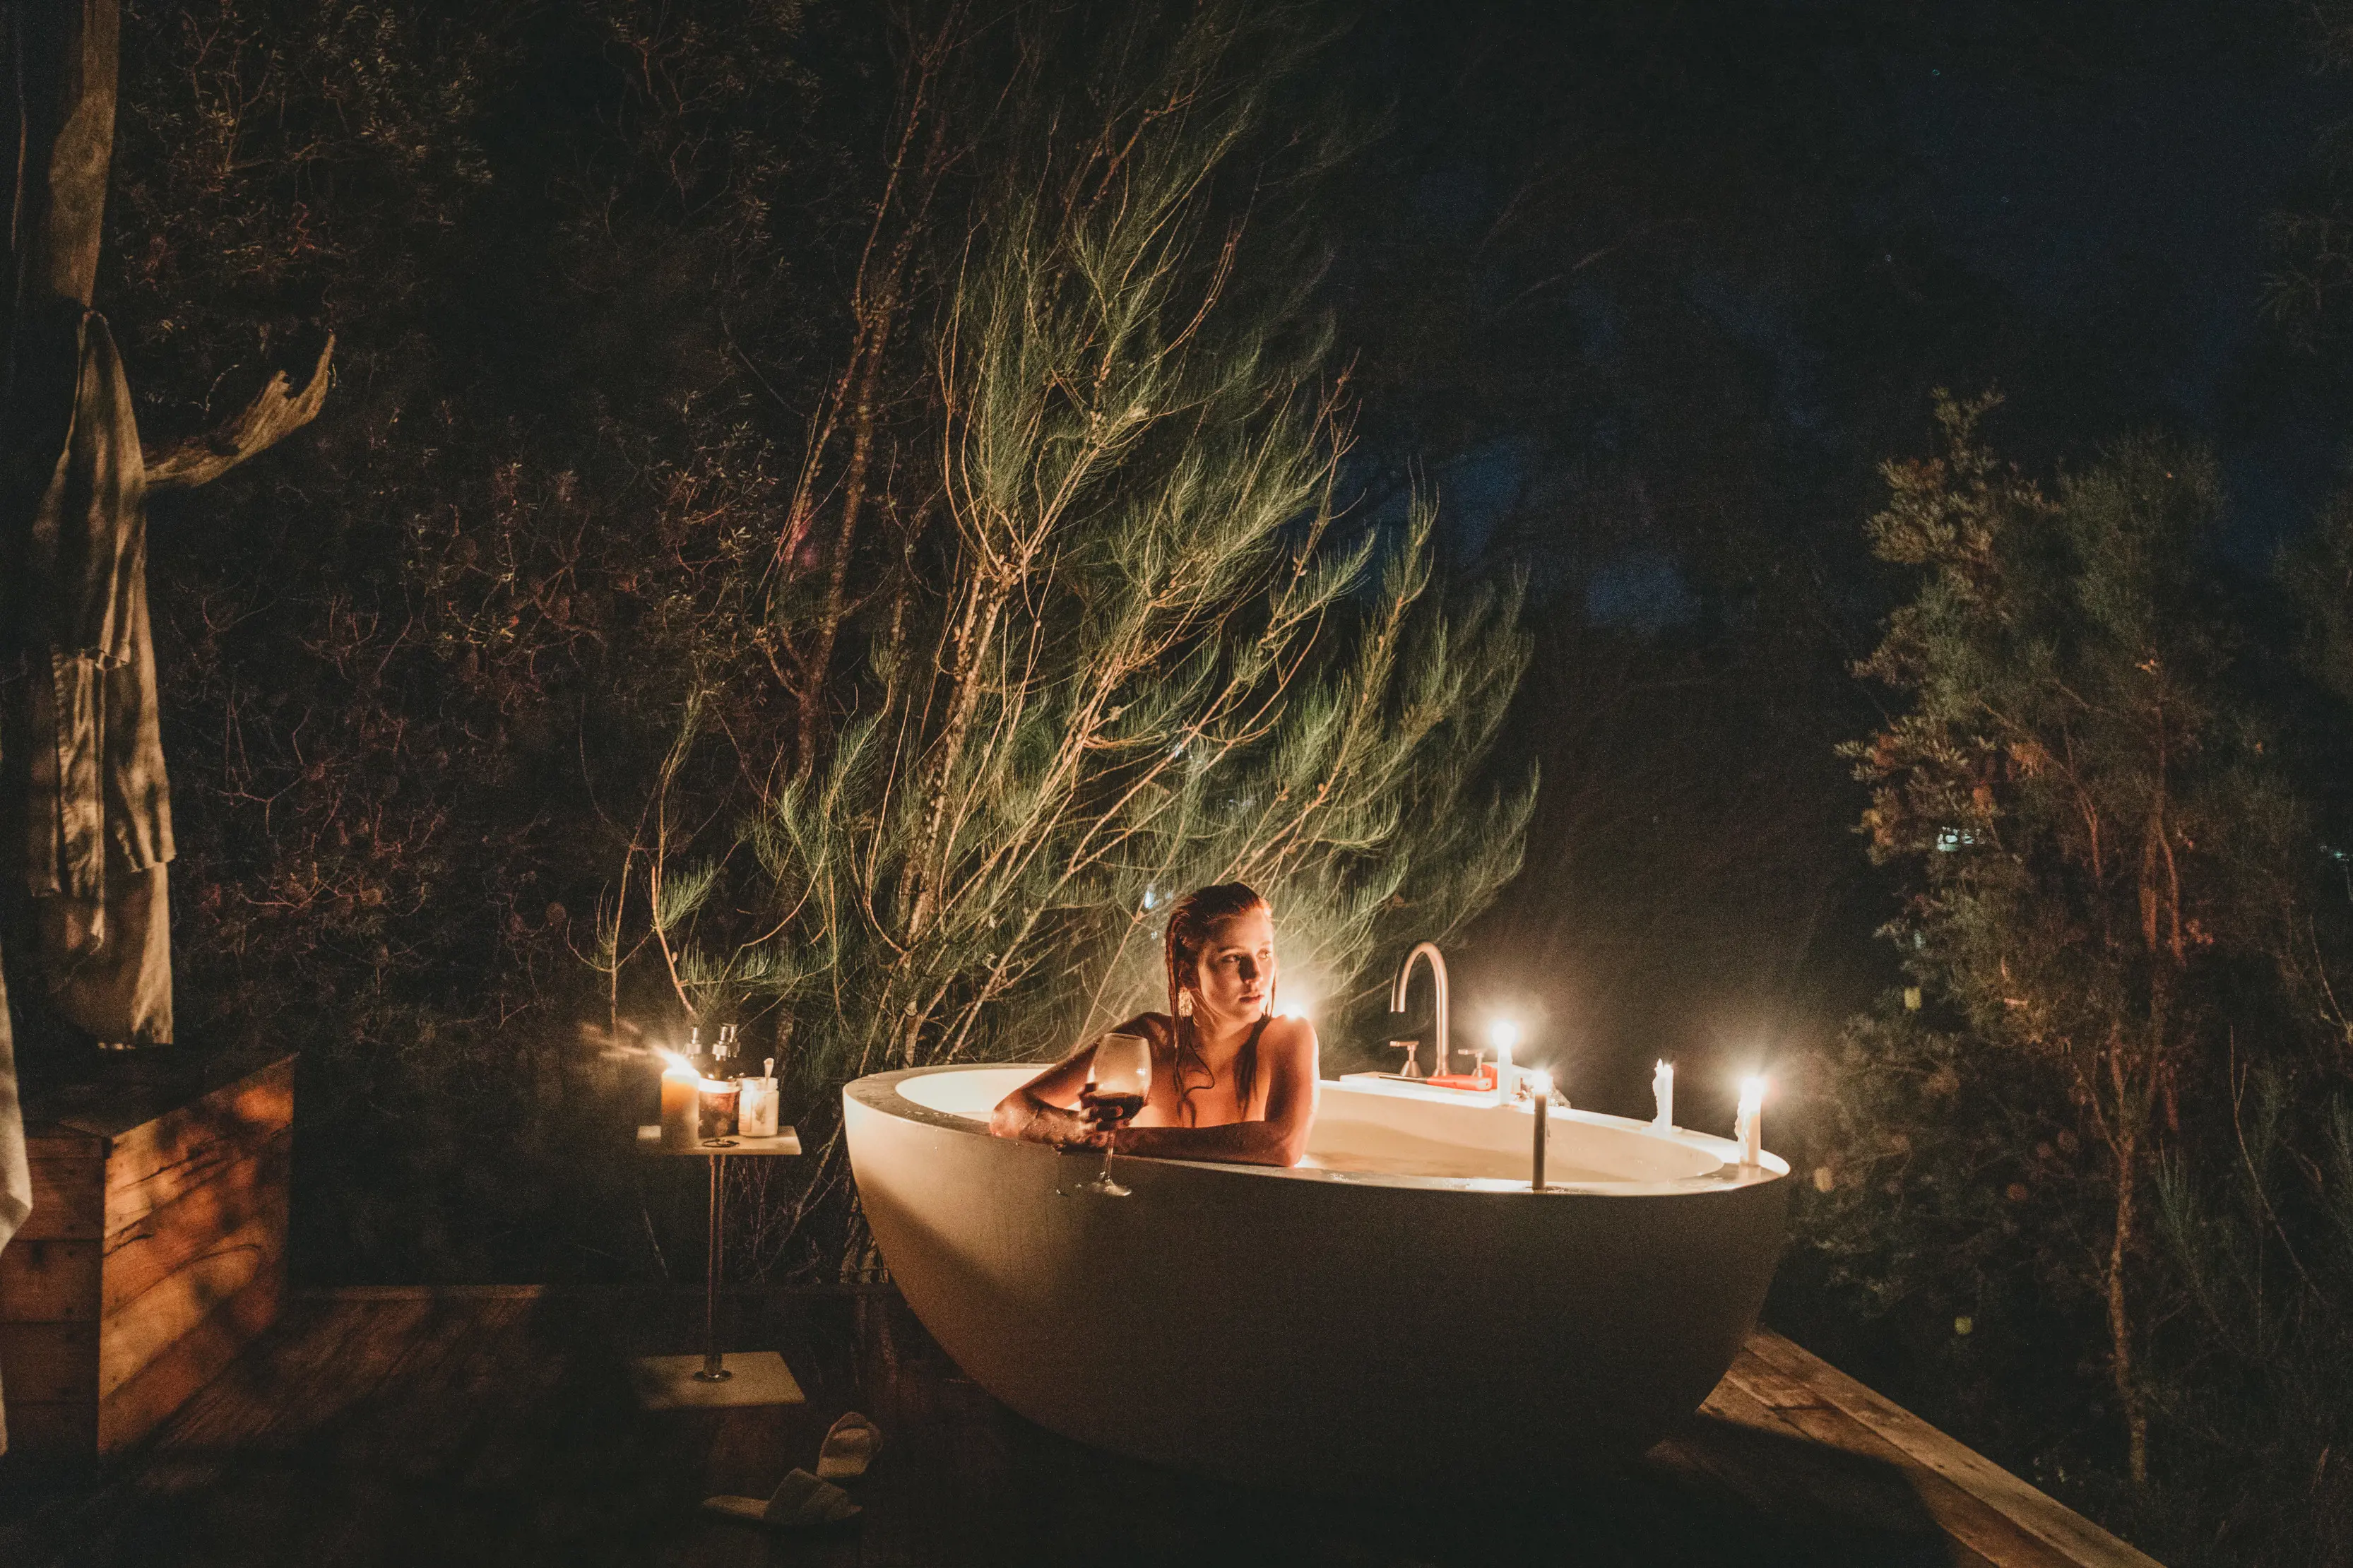 At night, a woman relaxes in a candle lit outdoor bathtub at The Retreat accomodation, Pumphouse Point.